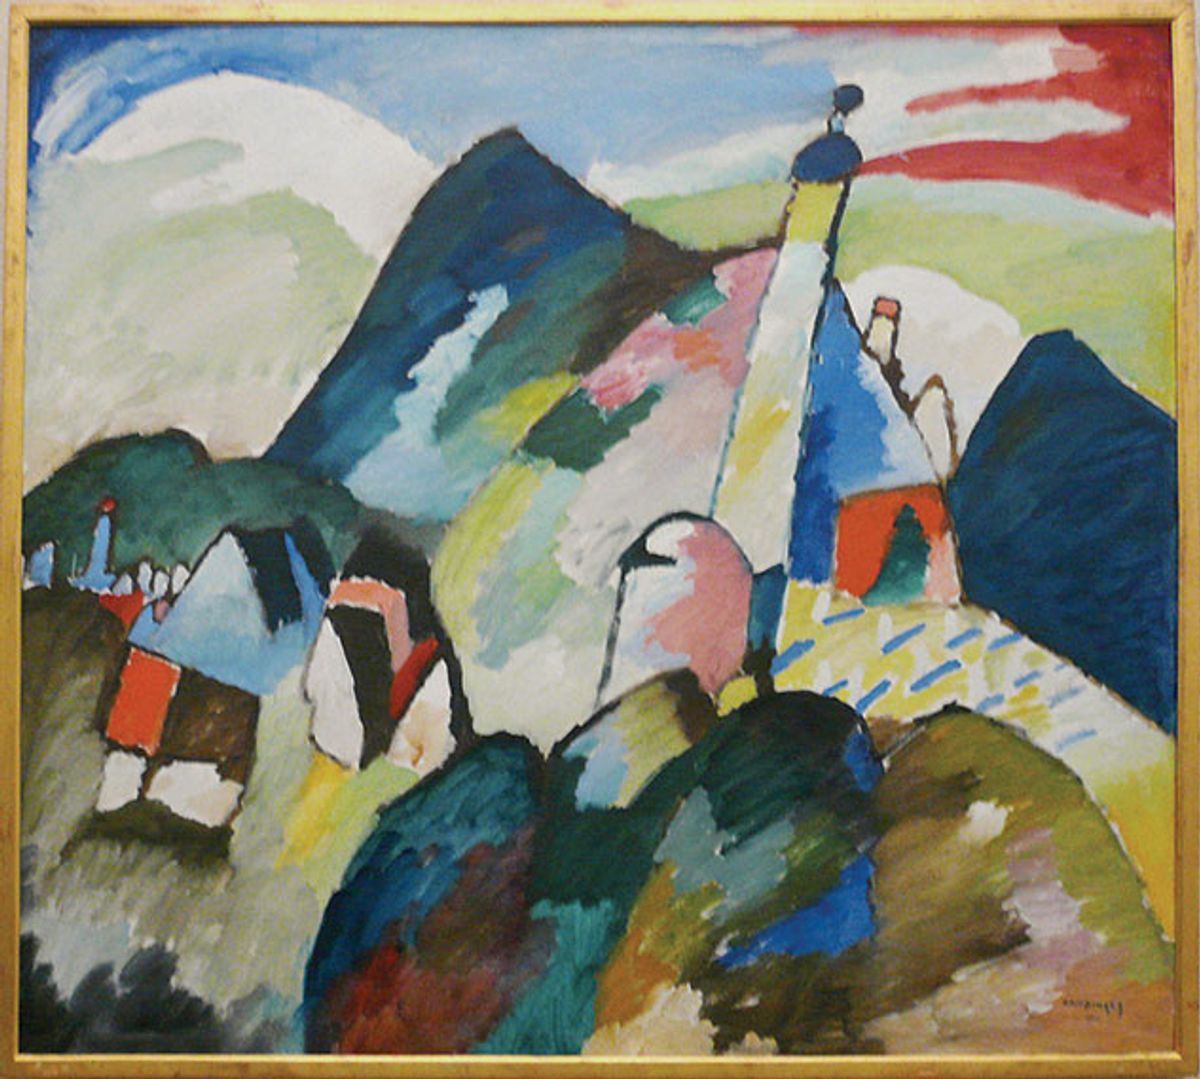 Kandinsky’s View of Murnau with Church (1910) has been in the Van Abbemuseum, Eindhoven, for more than 70 years, but will return to the heirs of its original owner Photo: G Lanting